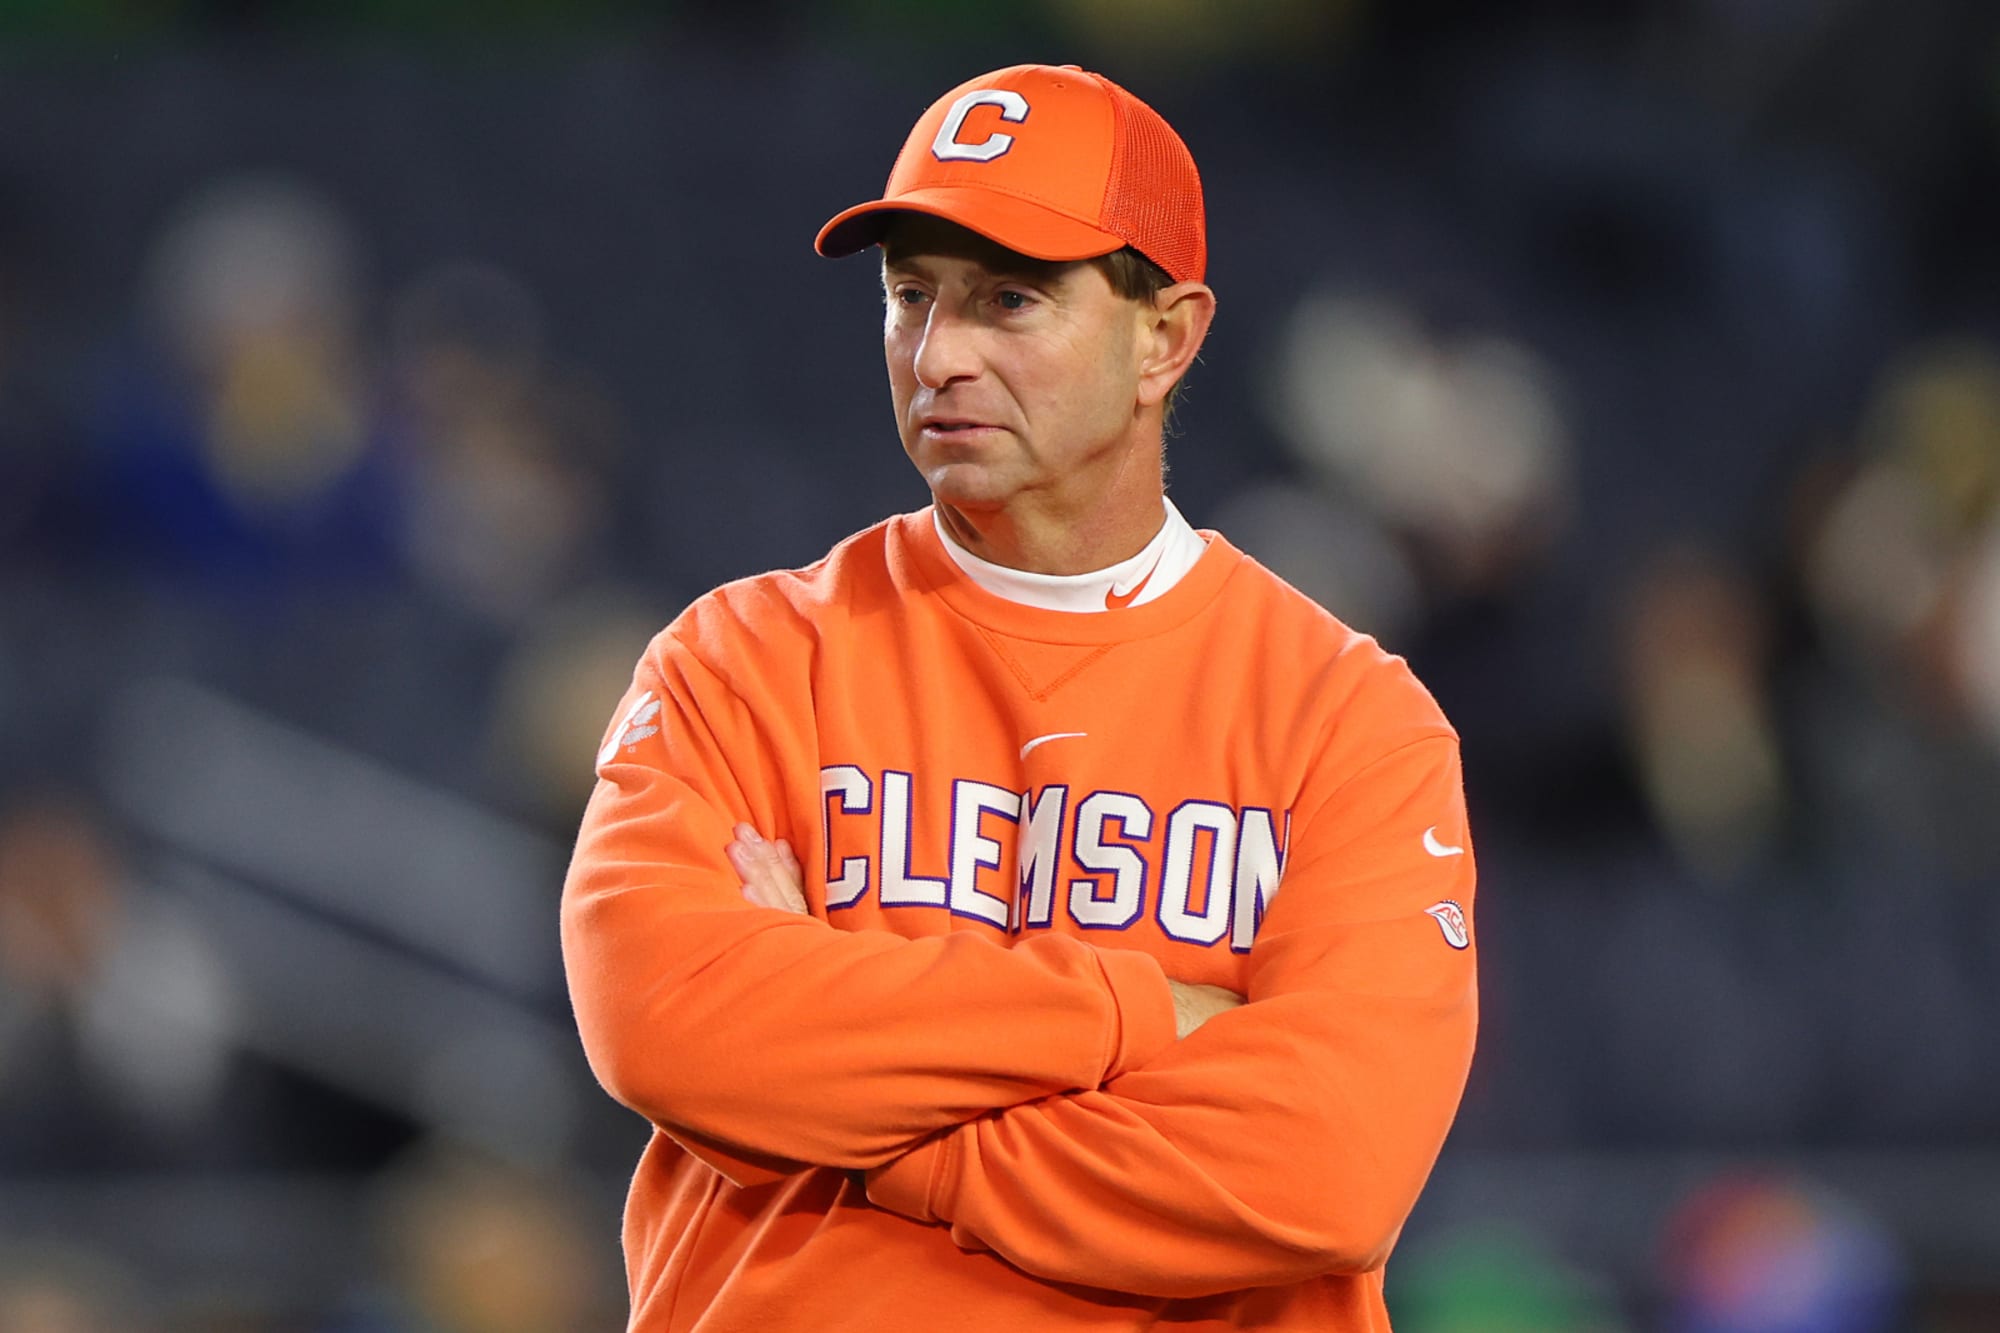 Clemson’s upset loss can snowball into something much worse